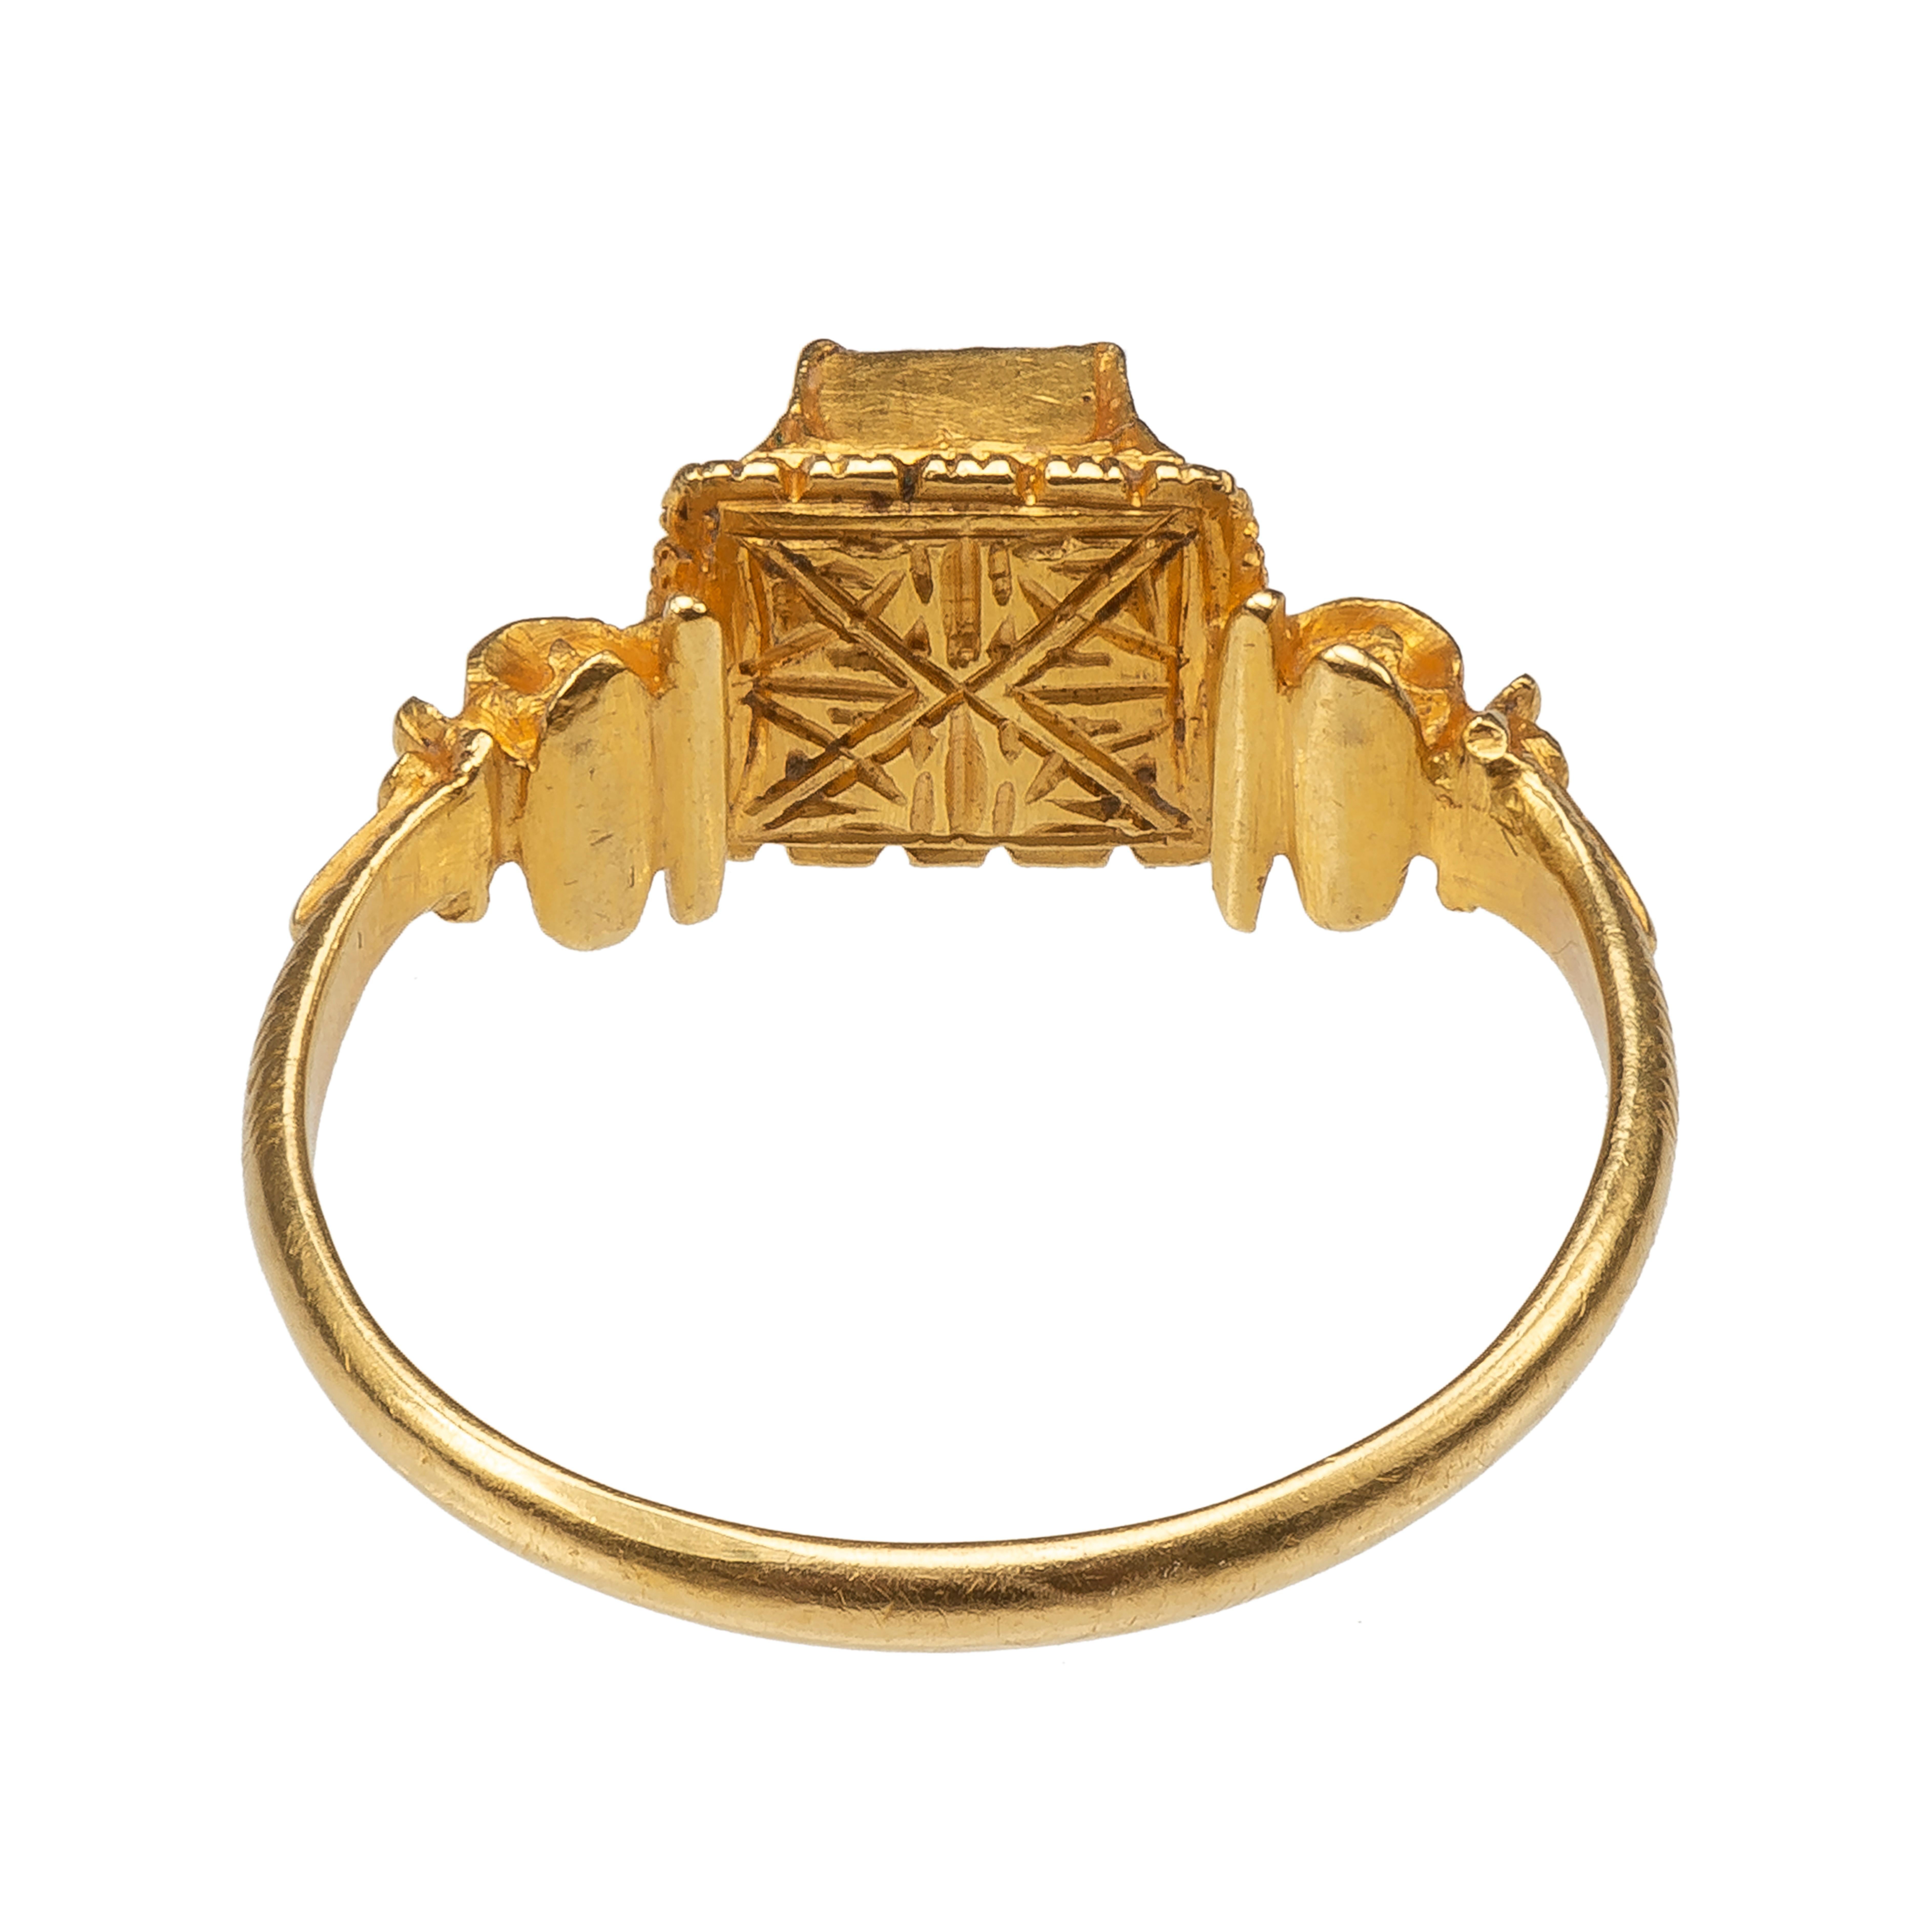 Renaissance Gold Marriage Ring with Table-Cut Rock Crystal In Good Condition For Sale In Chicago, IL